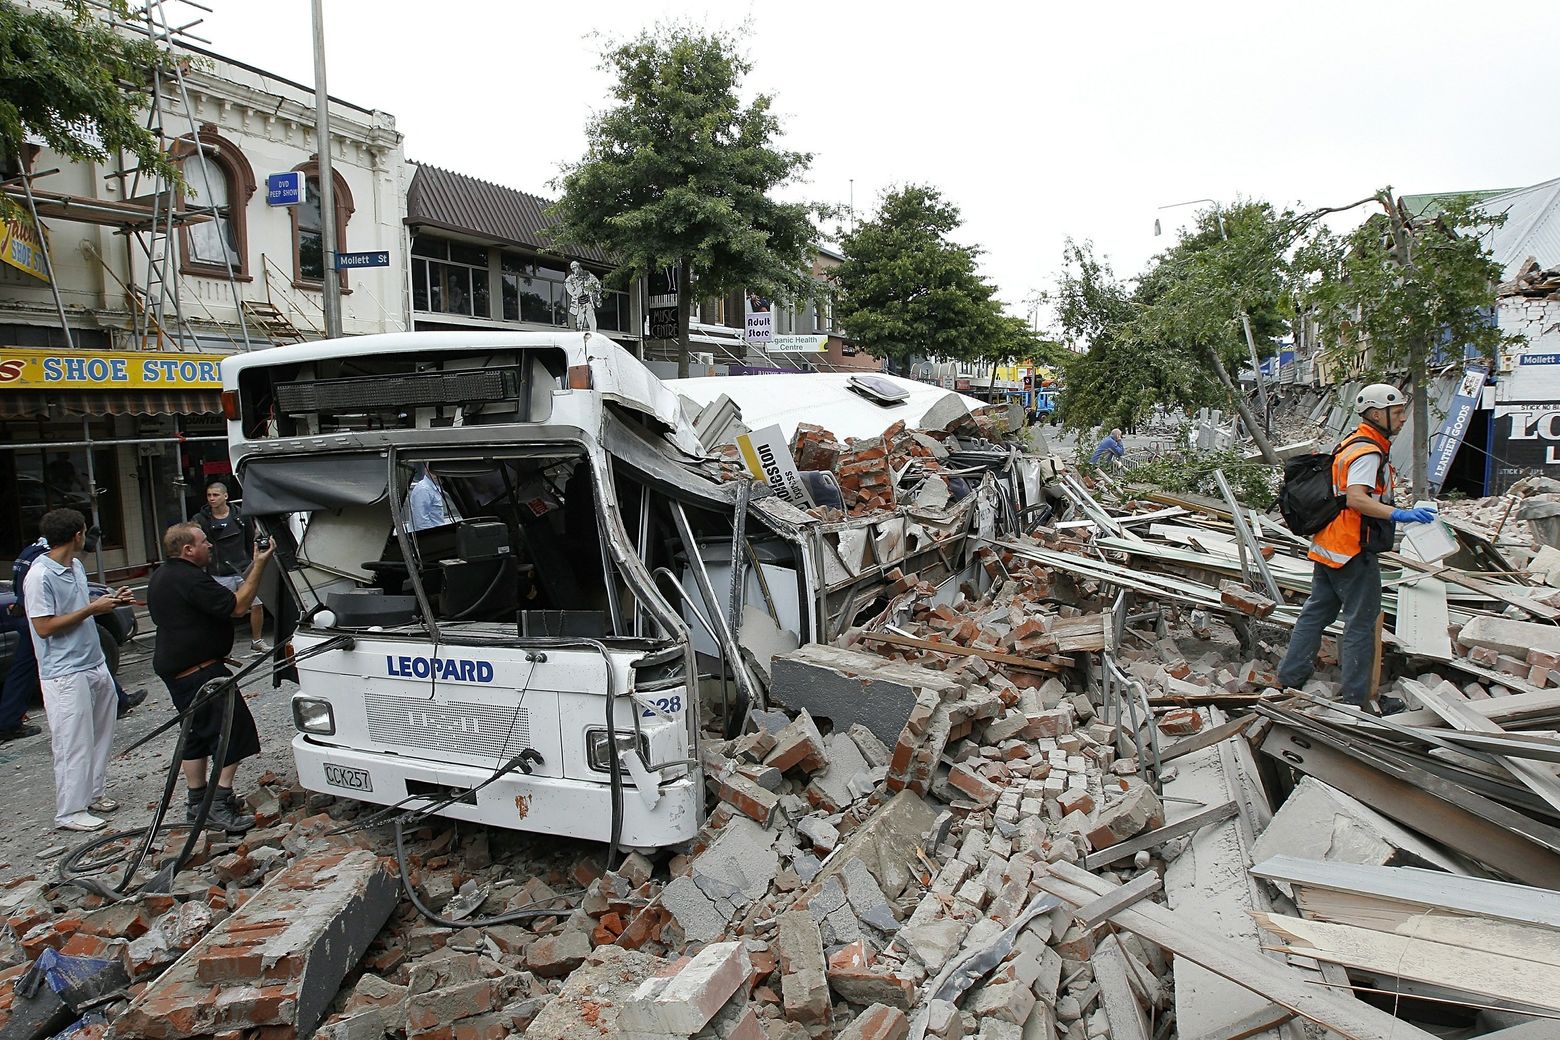 Lessons from Christchurch: 4 key ways Seattle can prepare for earthquake devastation